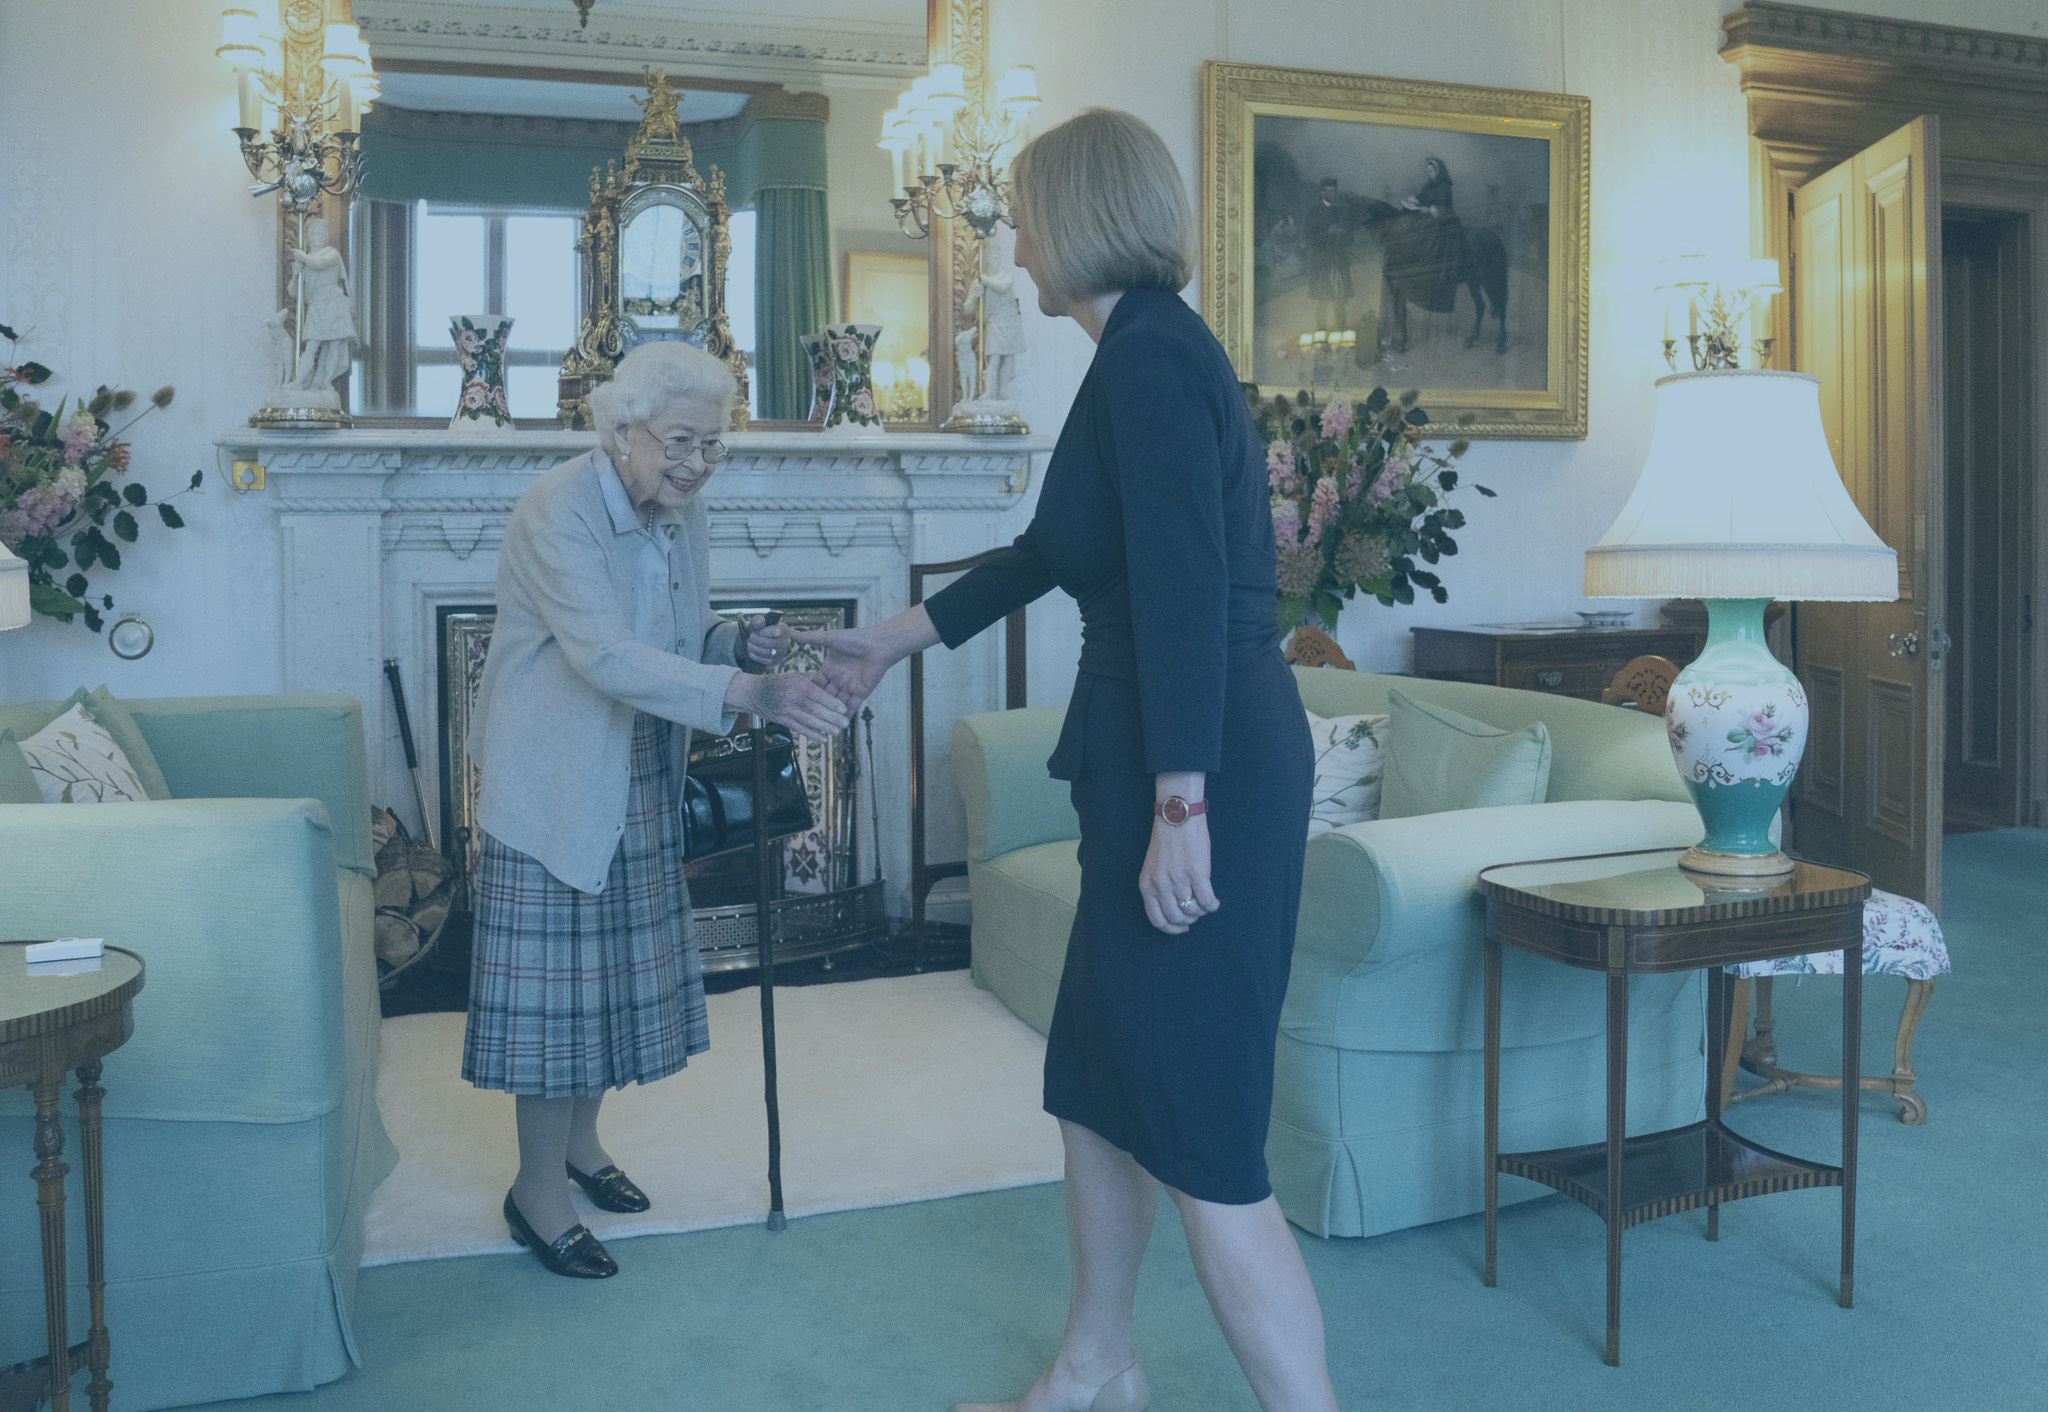 A frail old lady, the late Queen, rises from a sofa to shake hands with an approaching woman.